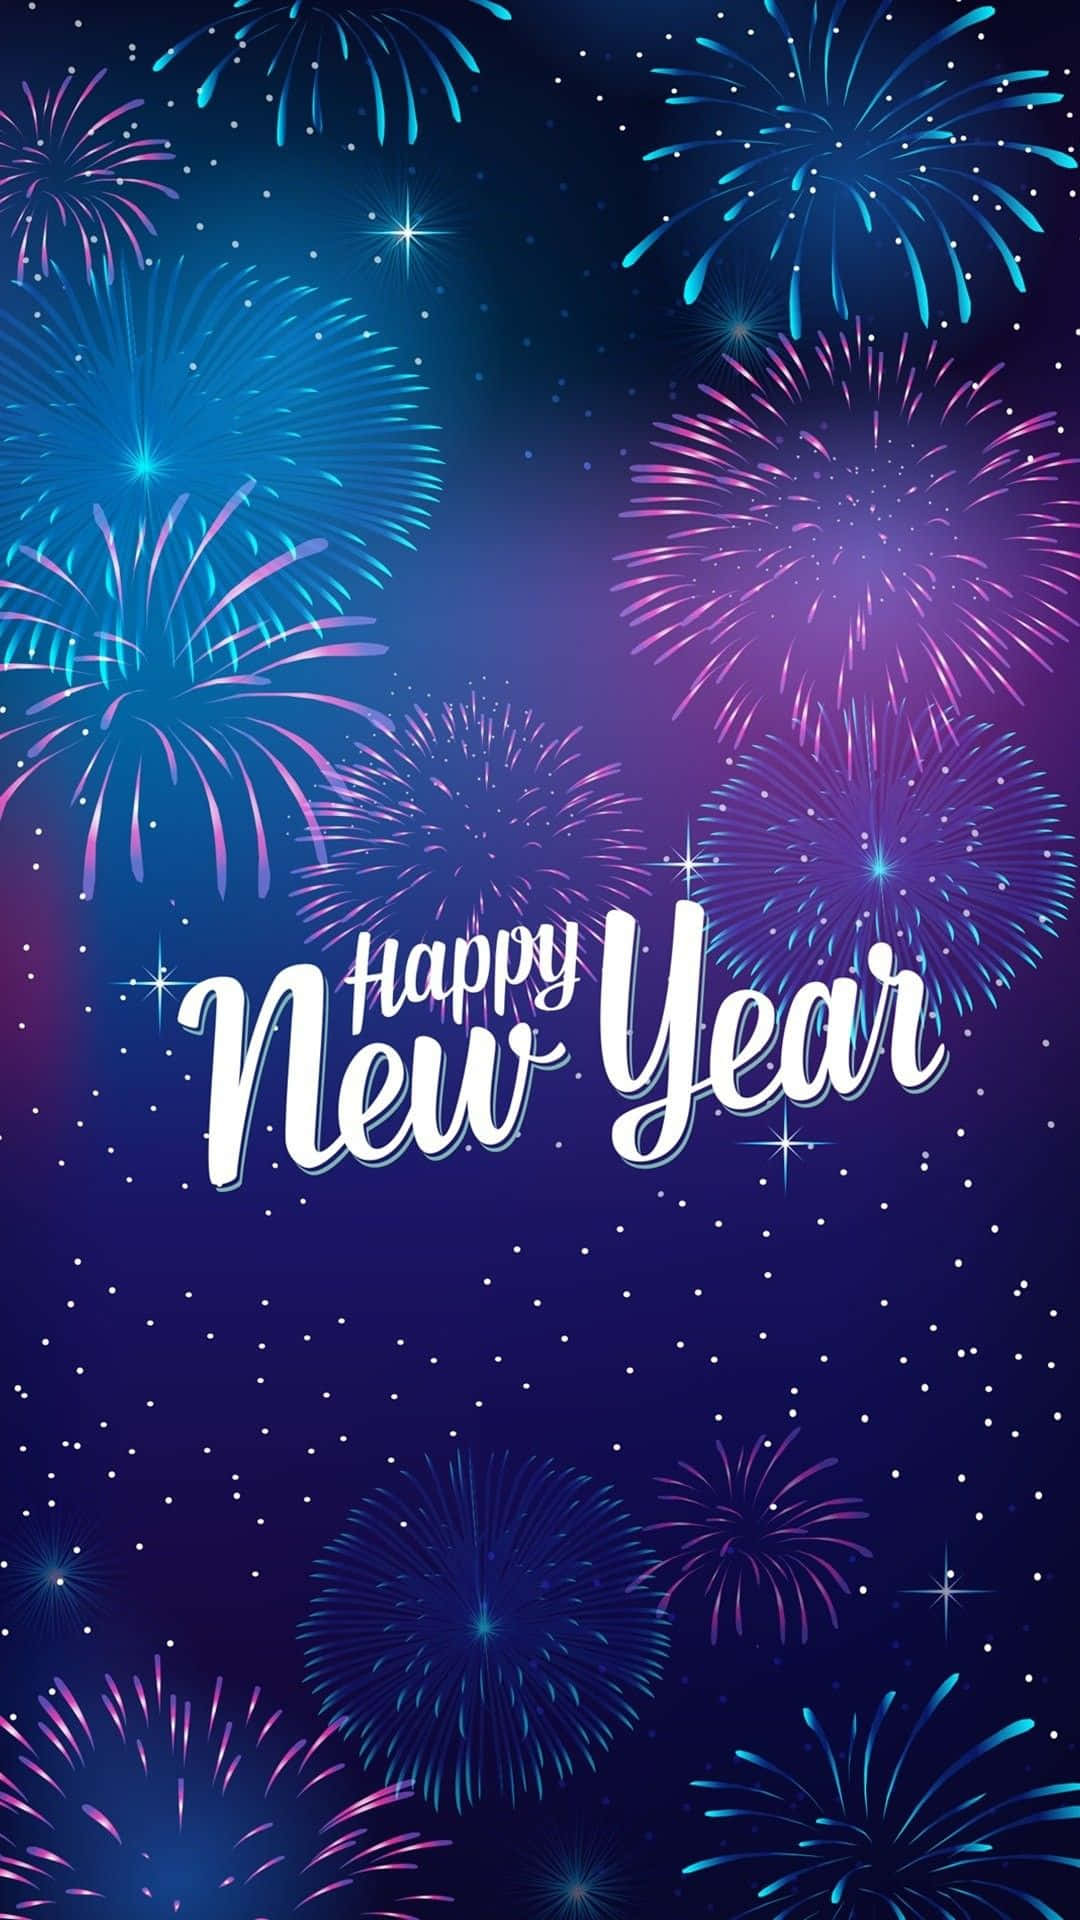 2021 Happy New Year Colorful Fireworks Wallpaper